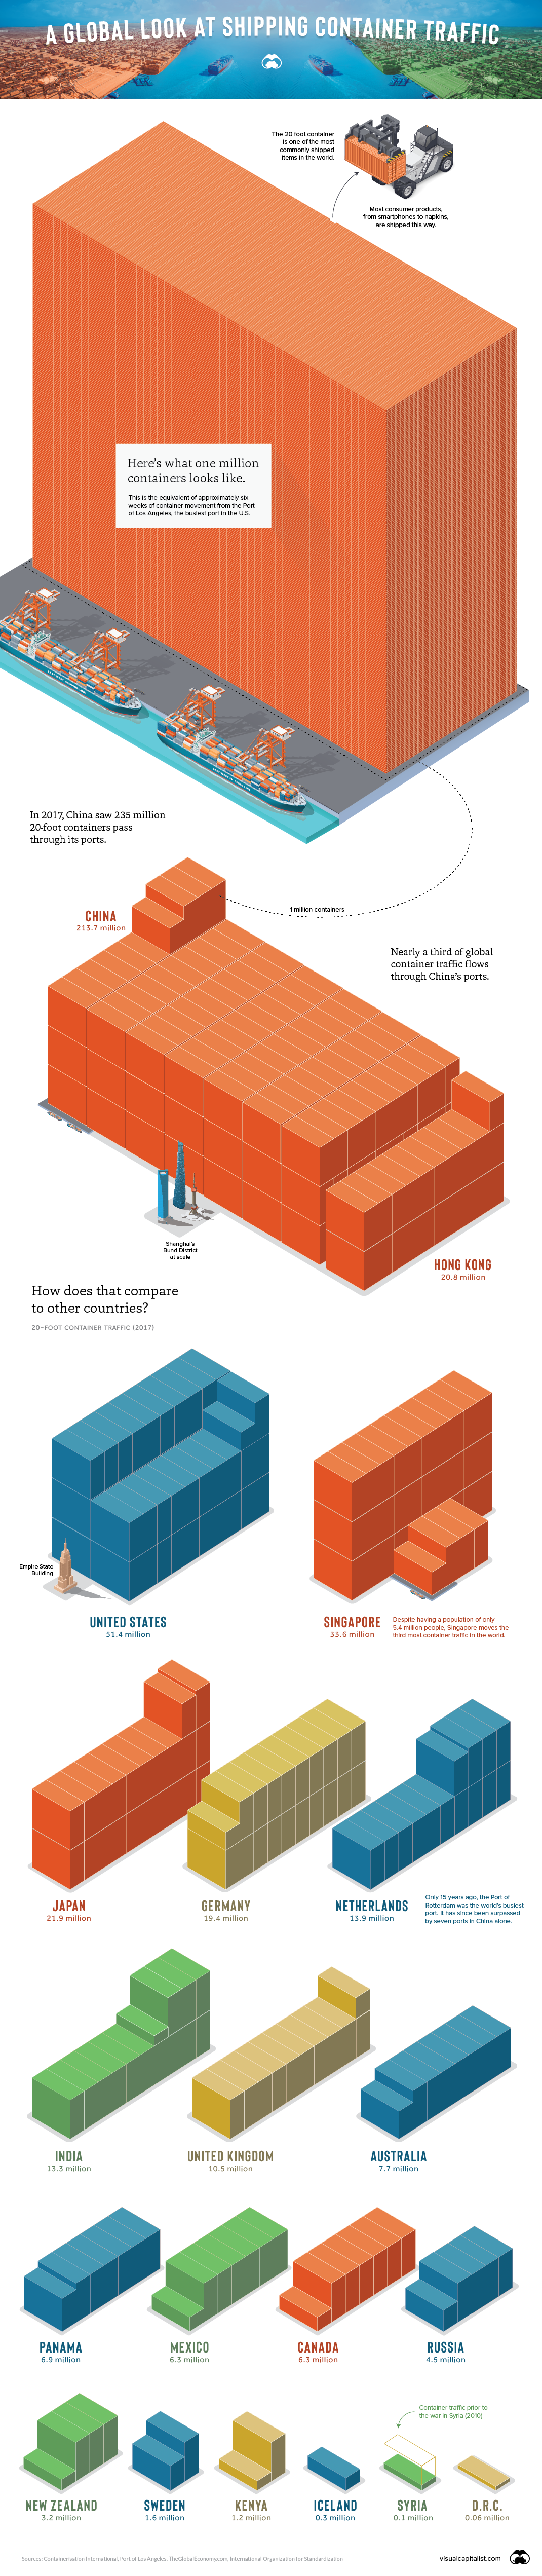 Shipping container traffic